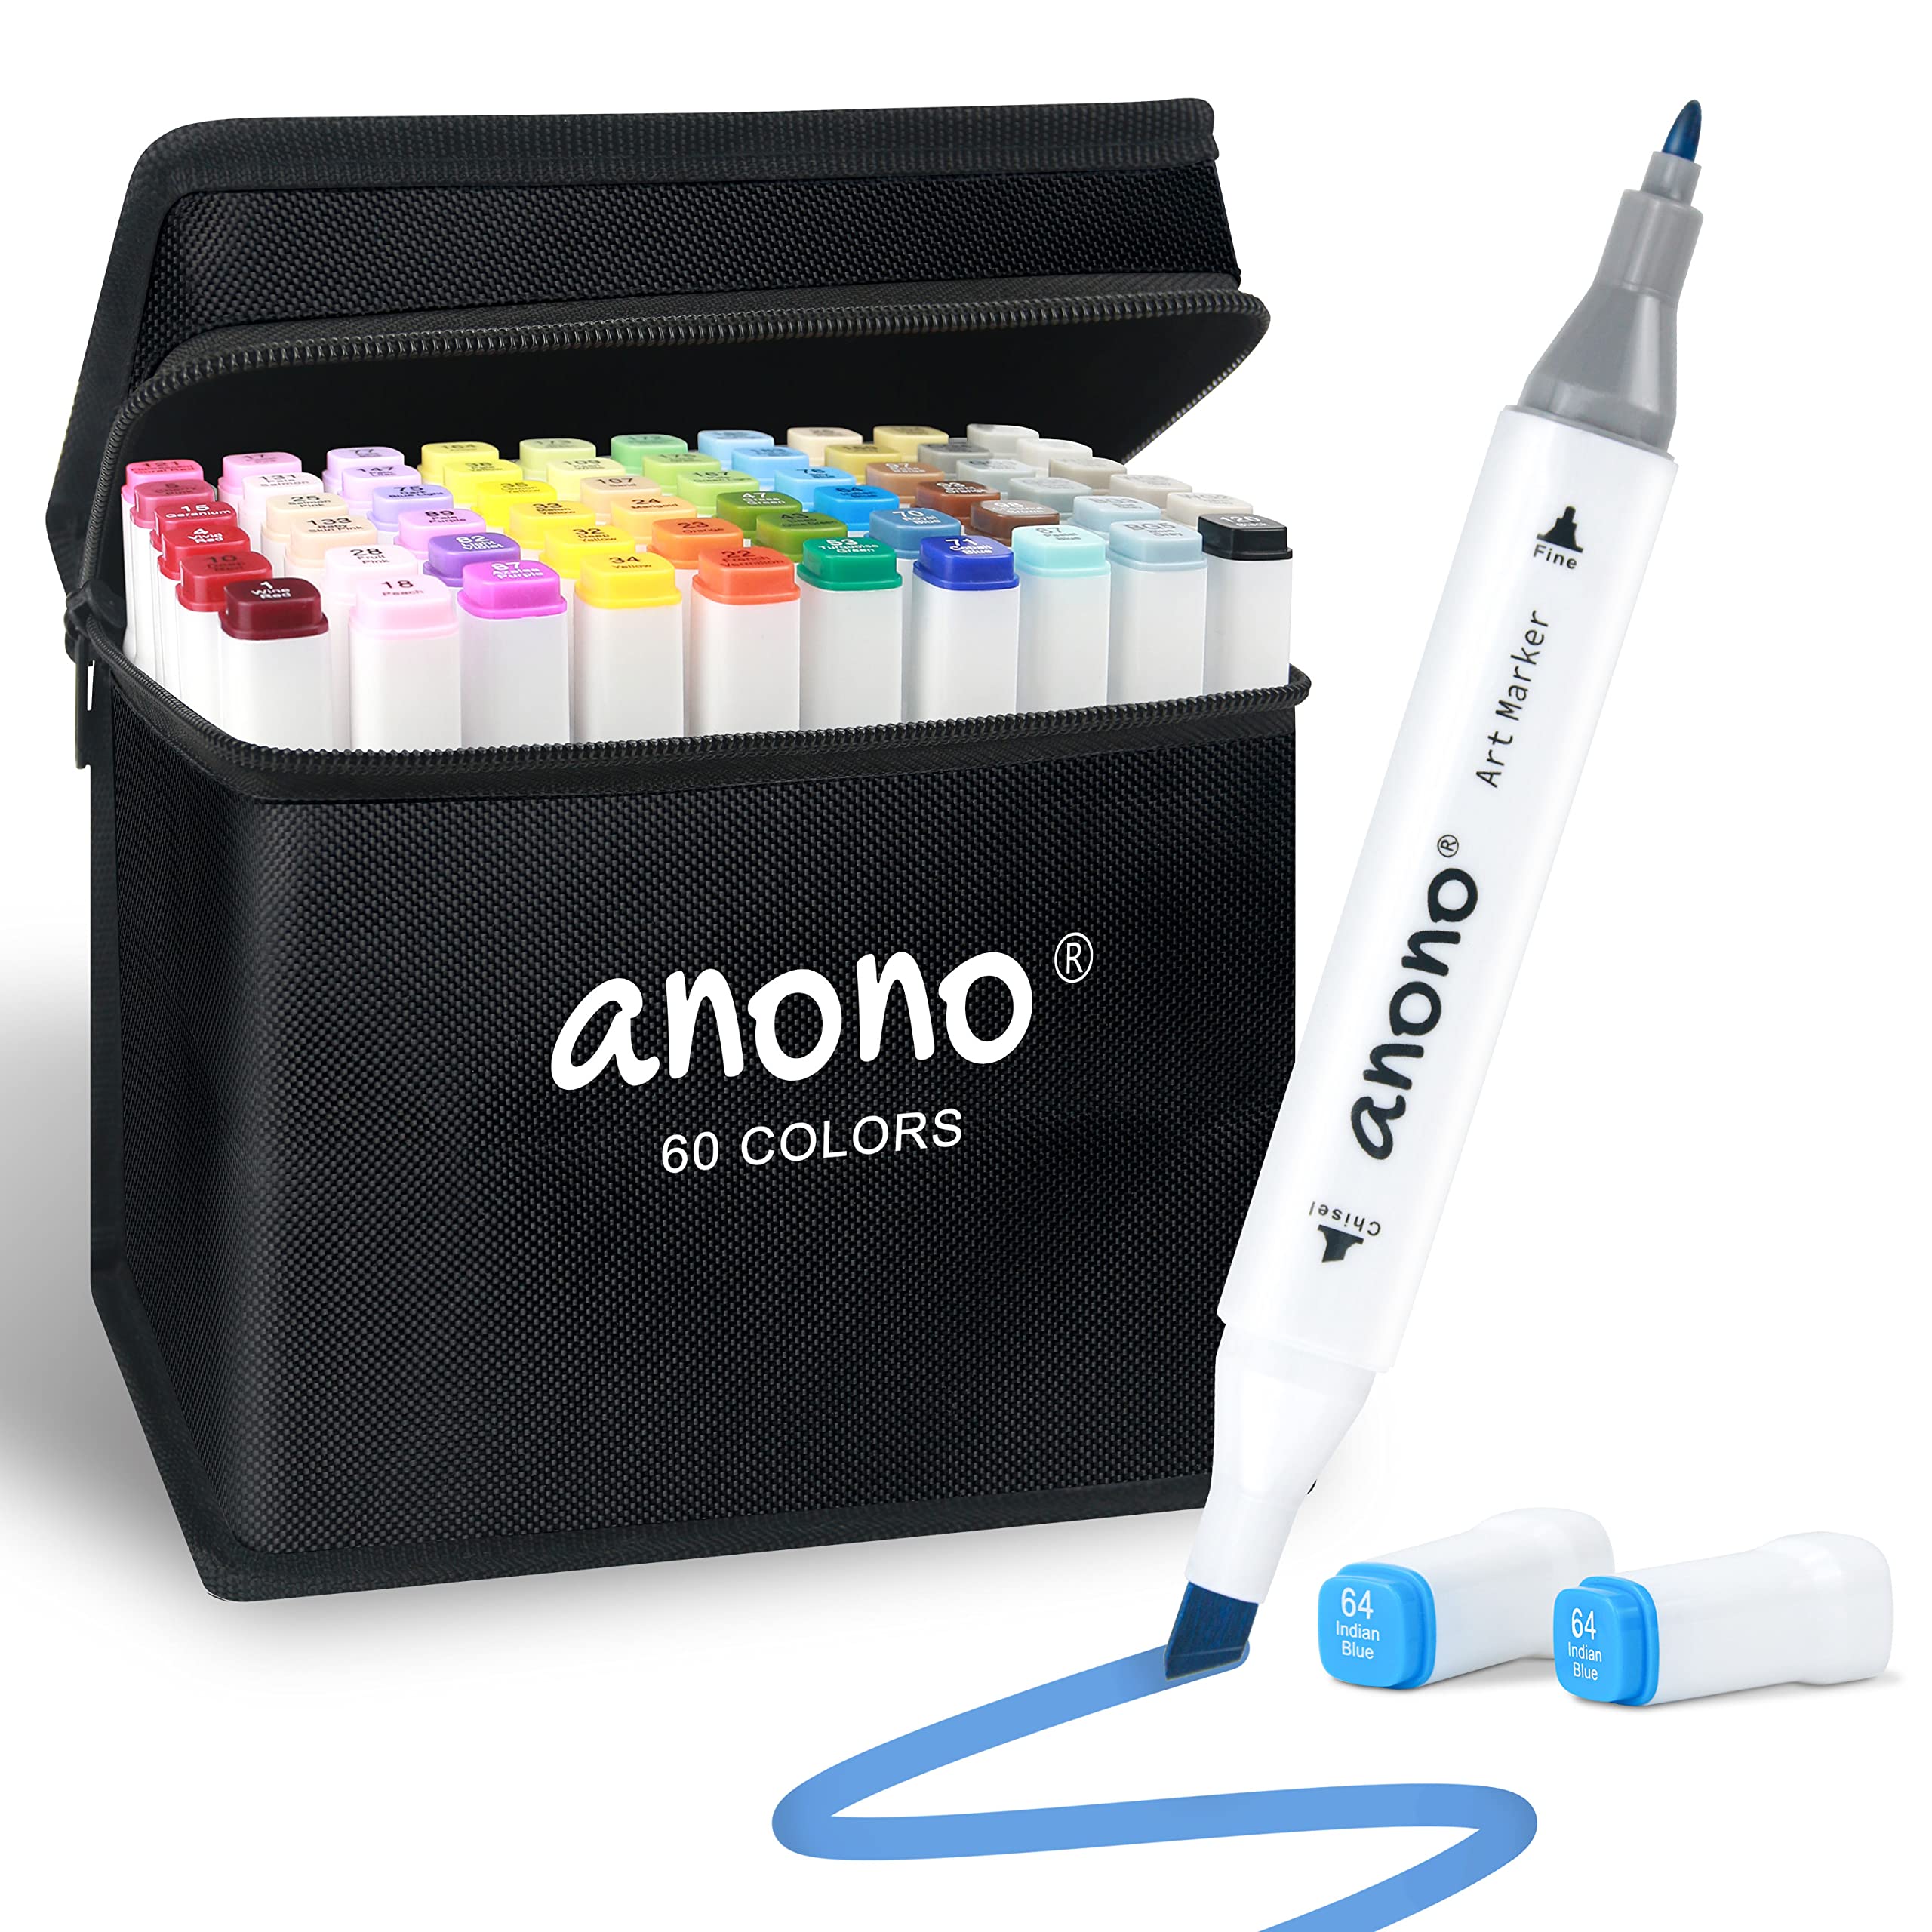 Anono 60 Colors Alcohol Marker Dual Tip Marker Permanent Marker Set Artist Markers With Carry Bag For Kids Adults Coloring Drawi